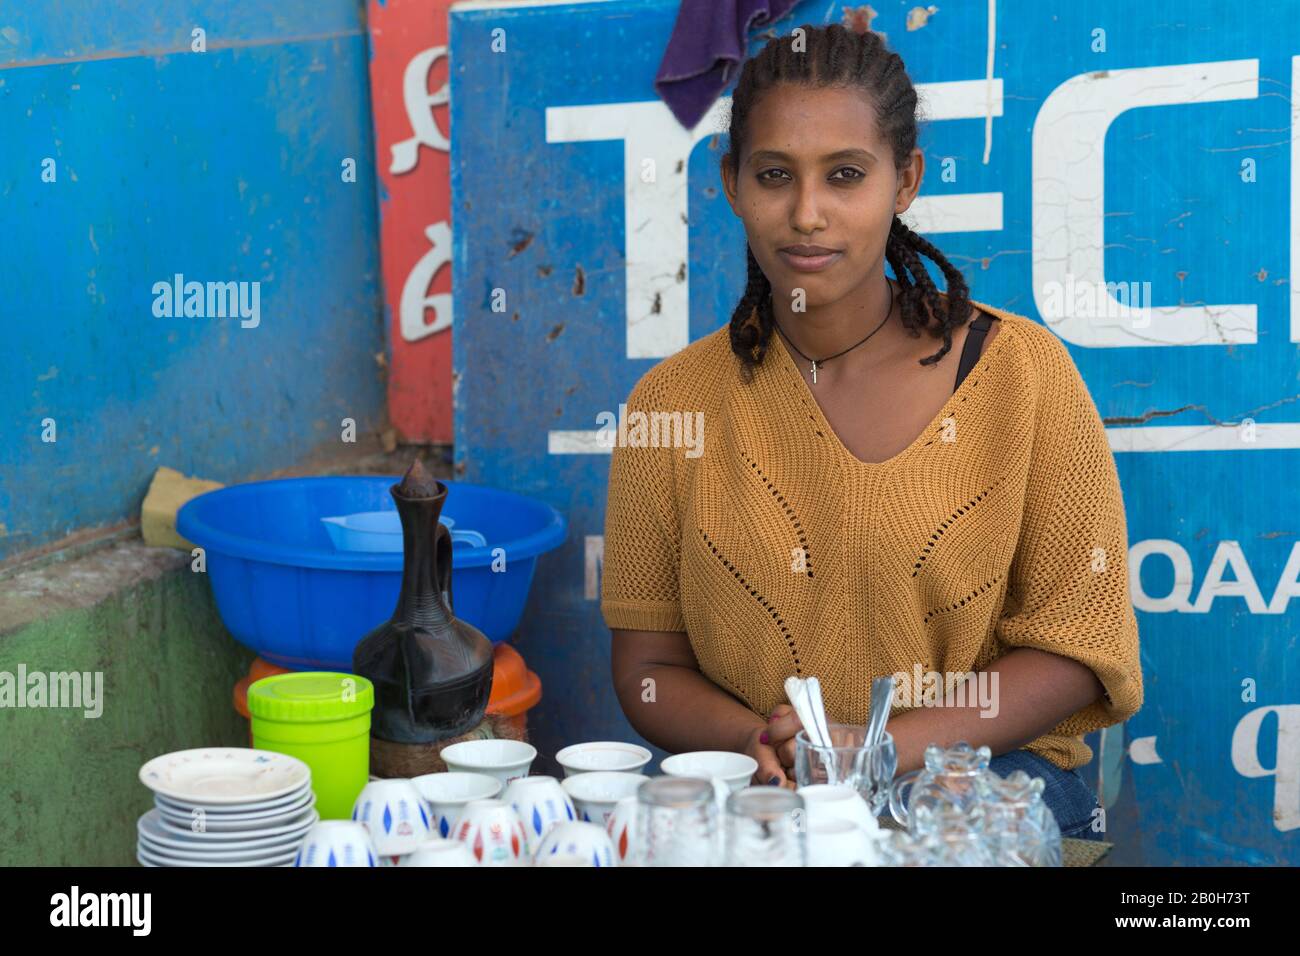 02.11.2019, Adama, Oromiyaa, Ethiopia - Traditional street coffee seller. Internally displaced person (IDP) from the Amhara region supported by the Wo Stock Photo